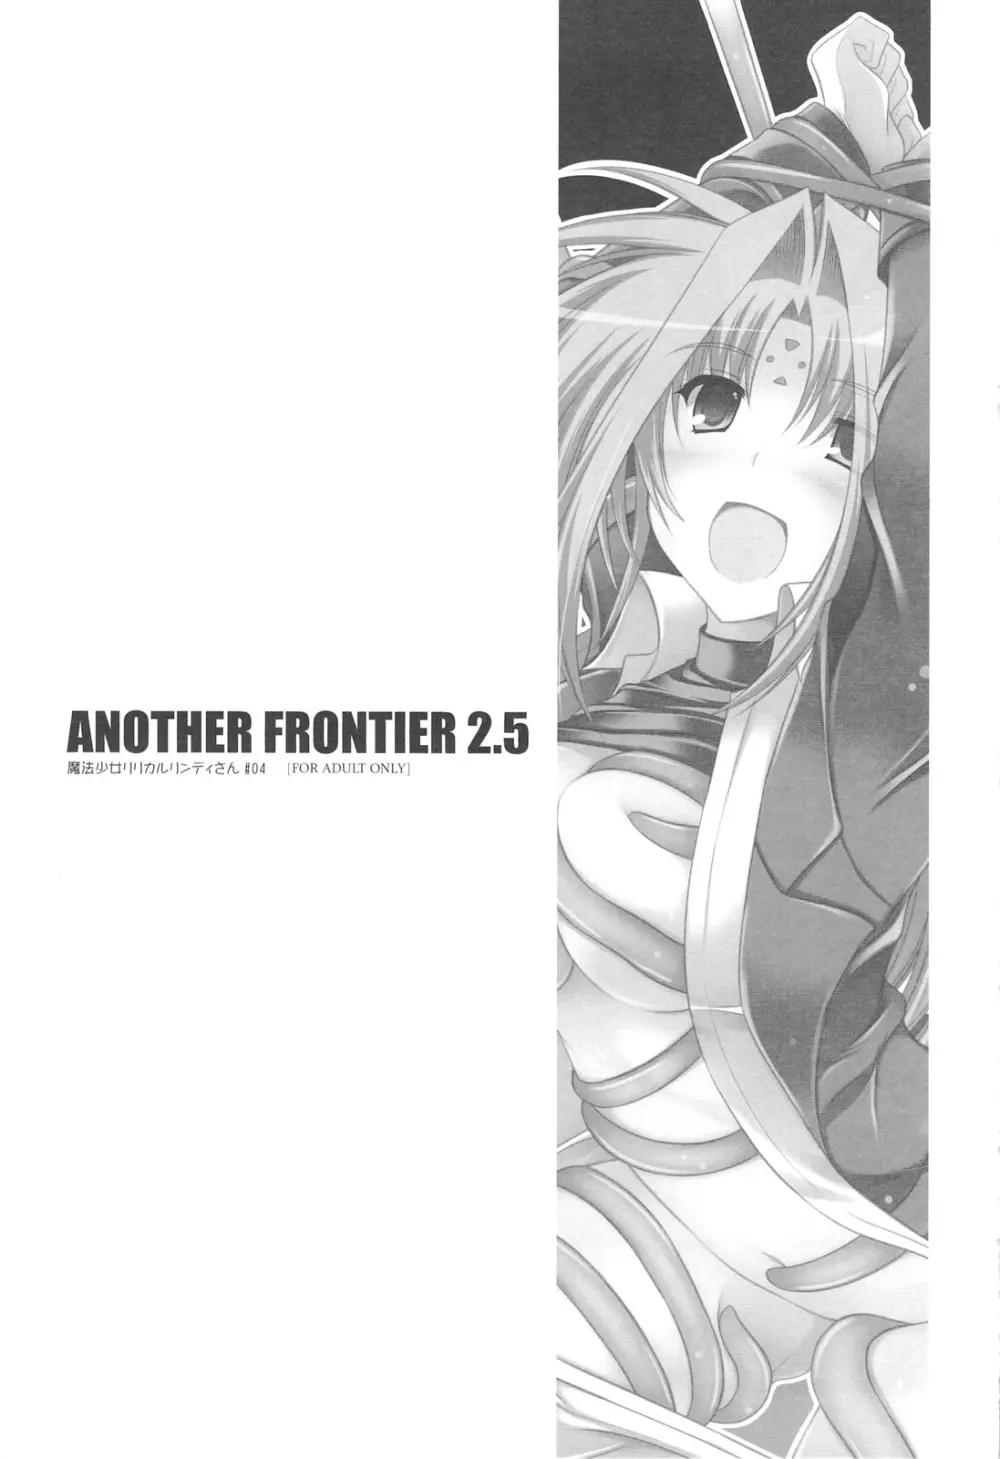 ANOTHER FRONTIER 2.5 魔法少女リリカルリンディさん #04 2ページ